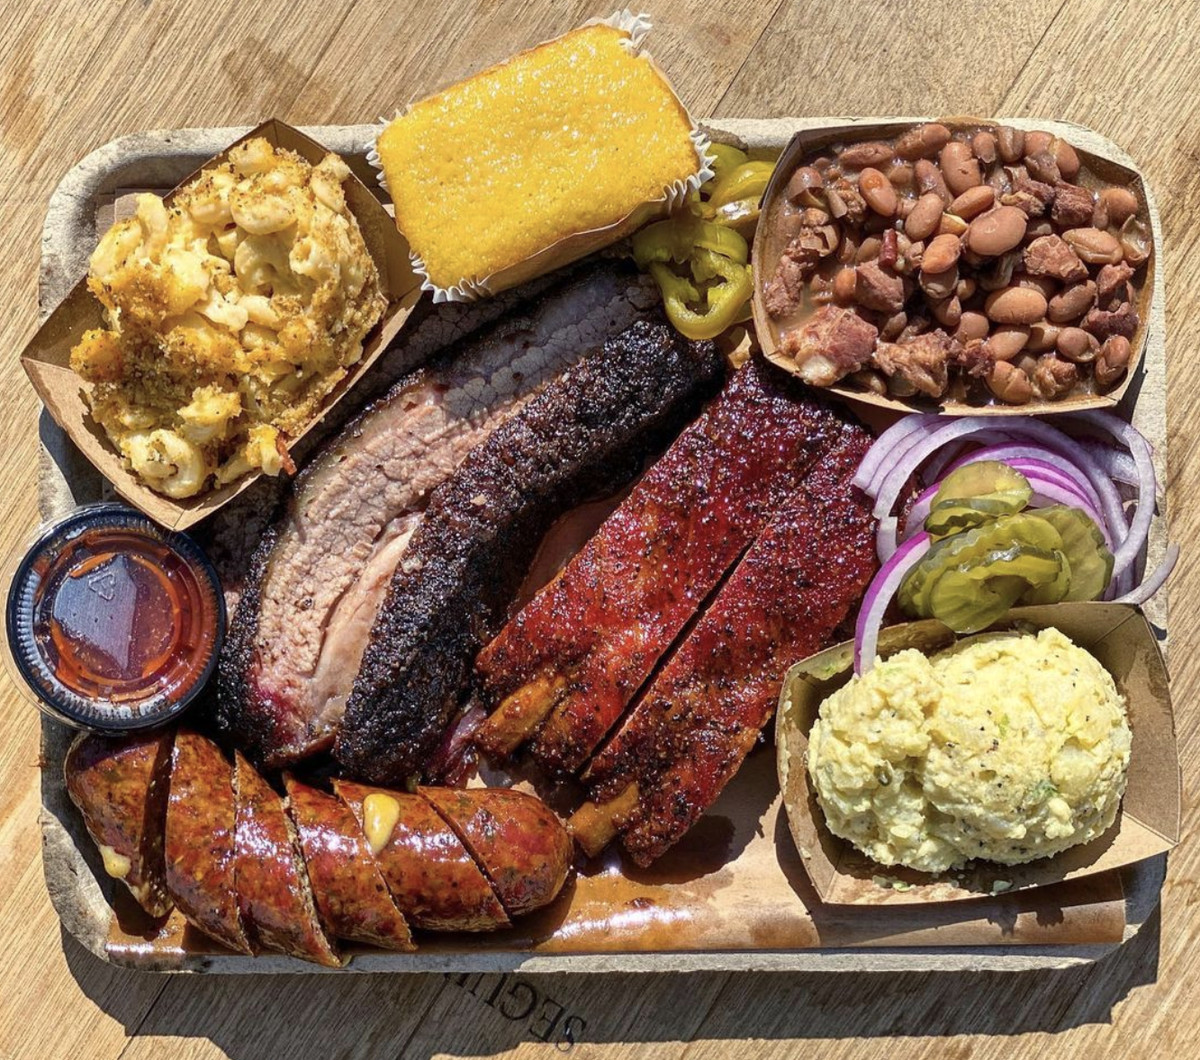 Plate of barbecue from Herc’s on a tray with sides.